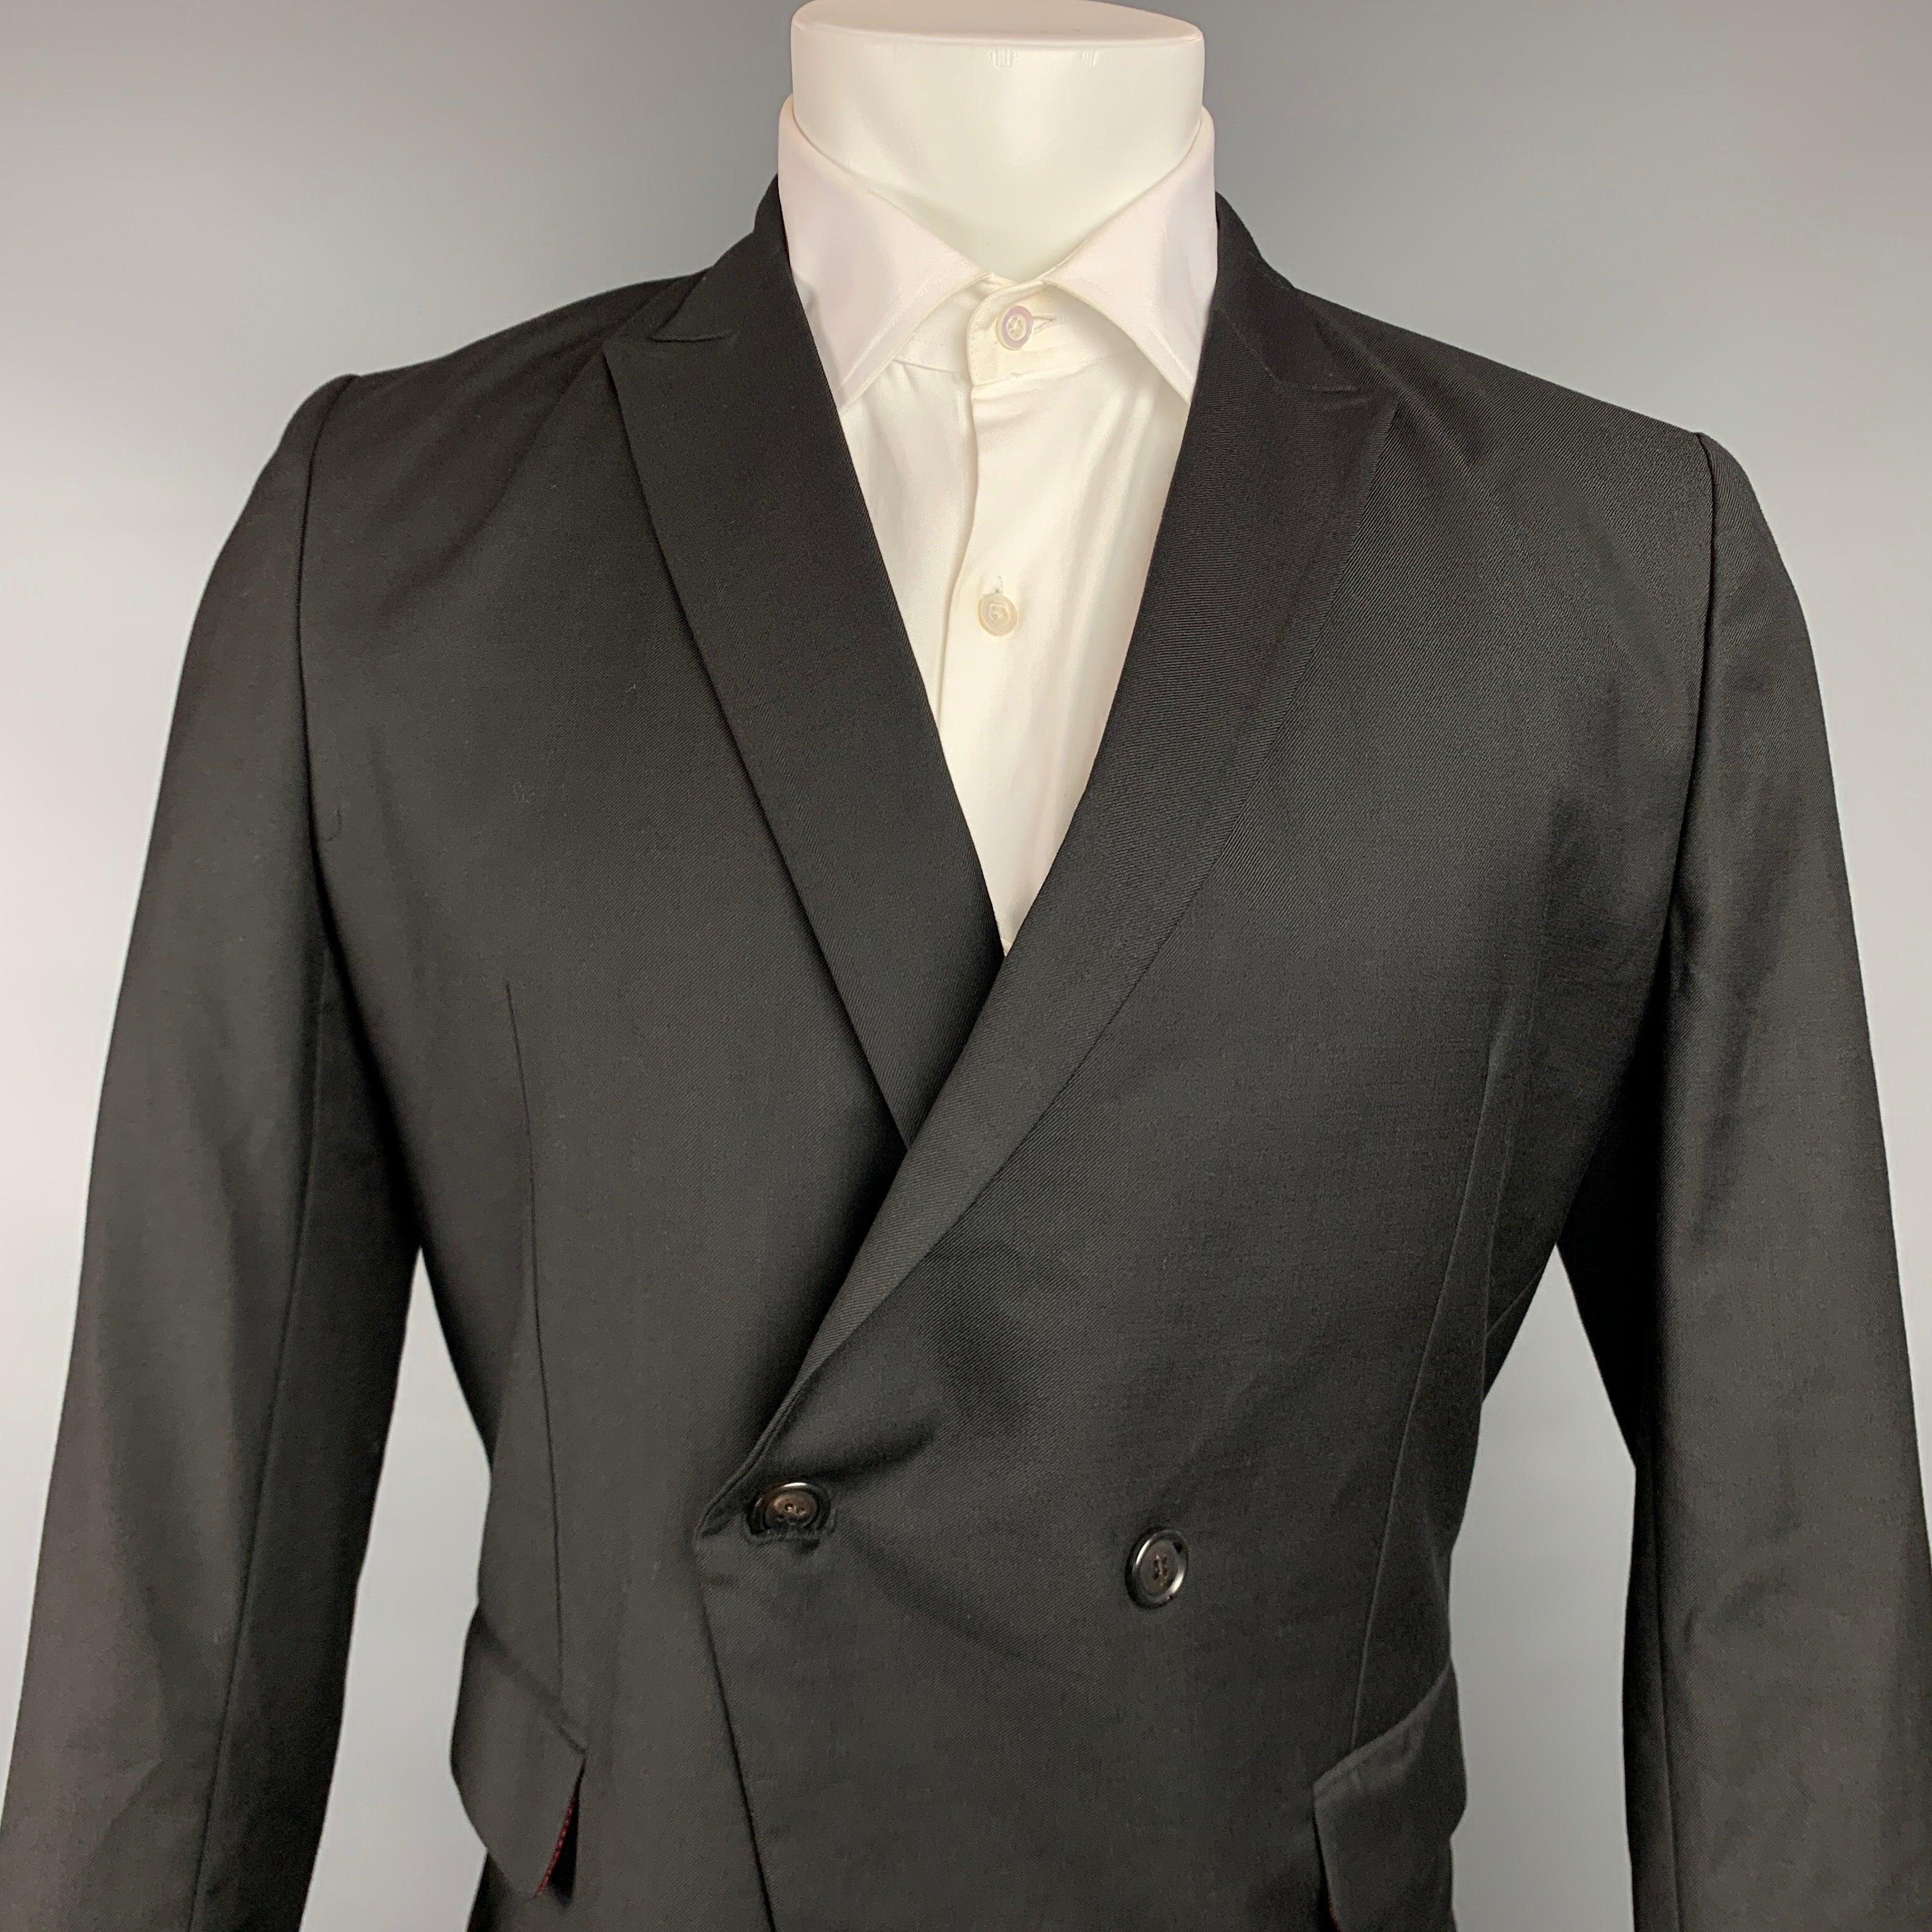 KRIS VAN ASSCHE
sport coat comes in a black wool with a full liner featuring a peak lapel, flap pockets, and a double breasted closure. Made in Italy.Very Good Pre-Owned Condition. 

Marked:   48 

Measurements: 
 
Shoulder: 17 inches  Chest: 38